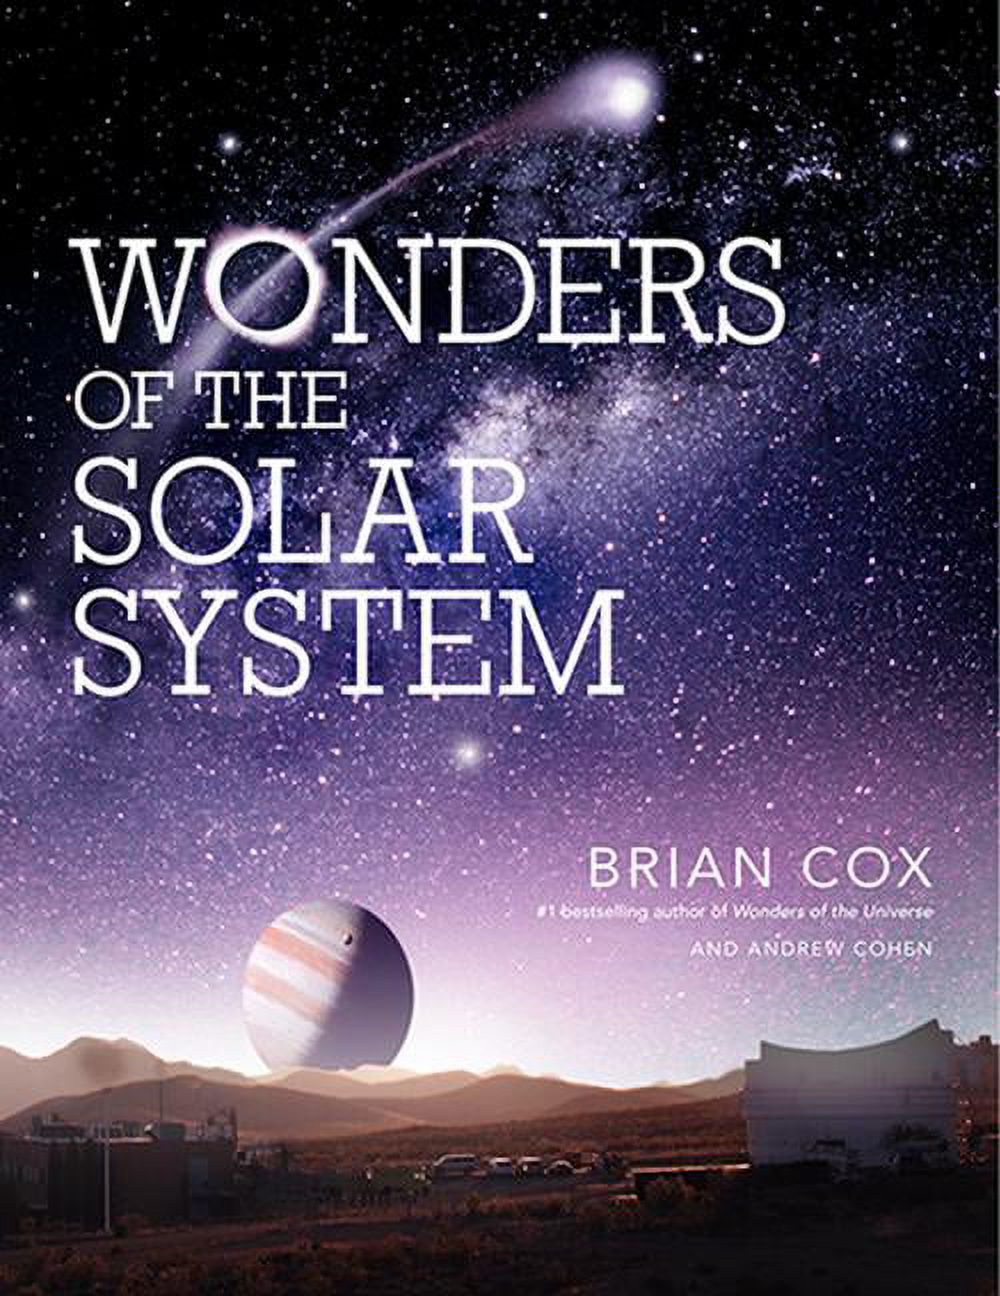 Wonders: Wonders of the Solar System (Hardcover) - image 1 of 1